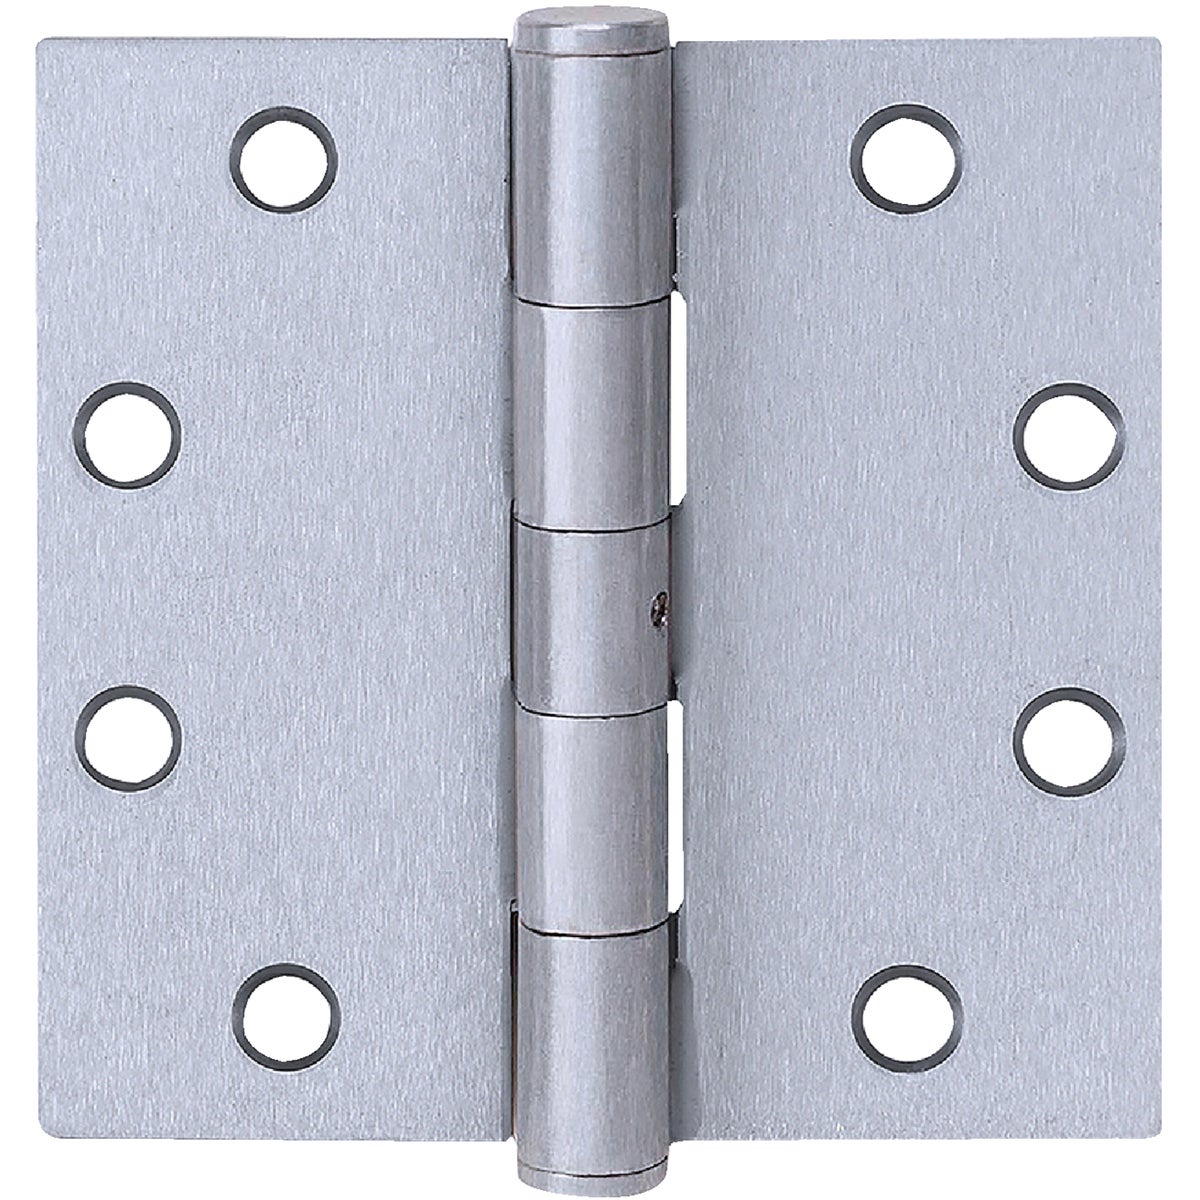 Item 247638, Heavy duty commercial square plain hinge with square corners is made from .